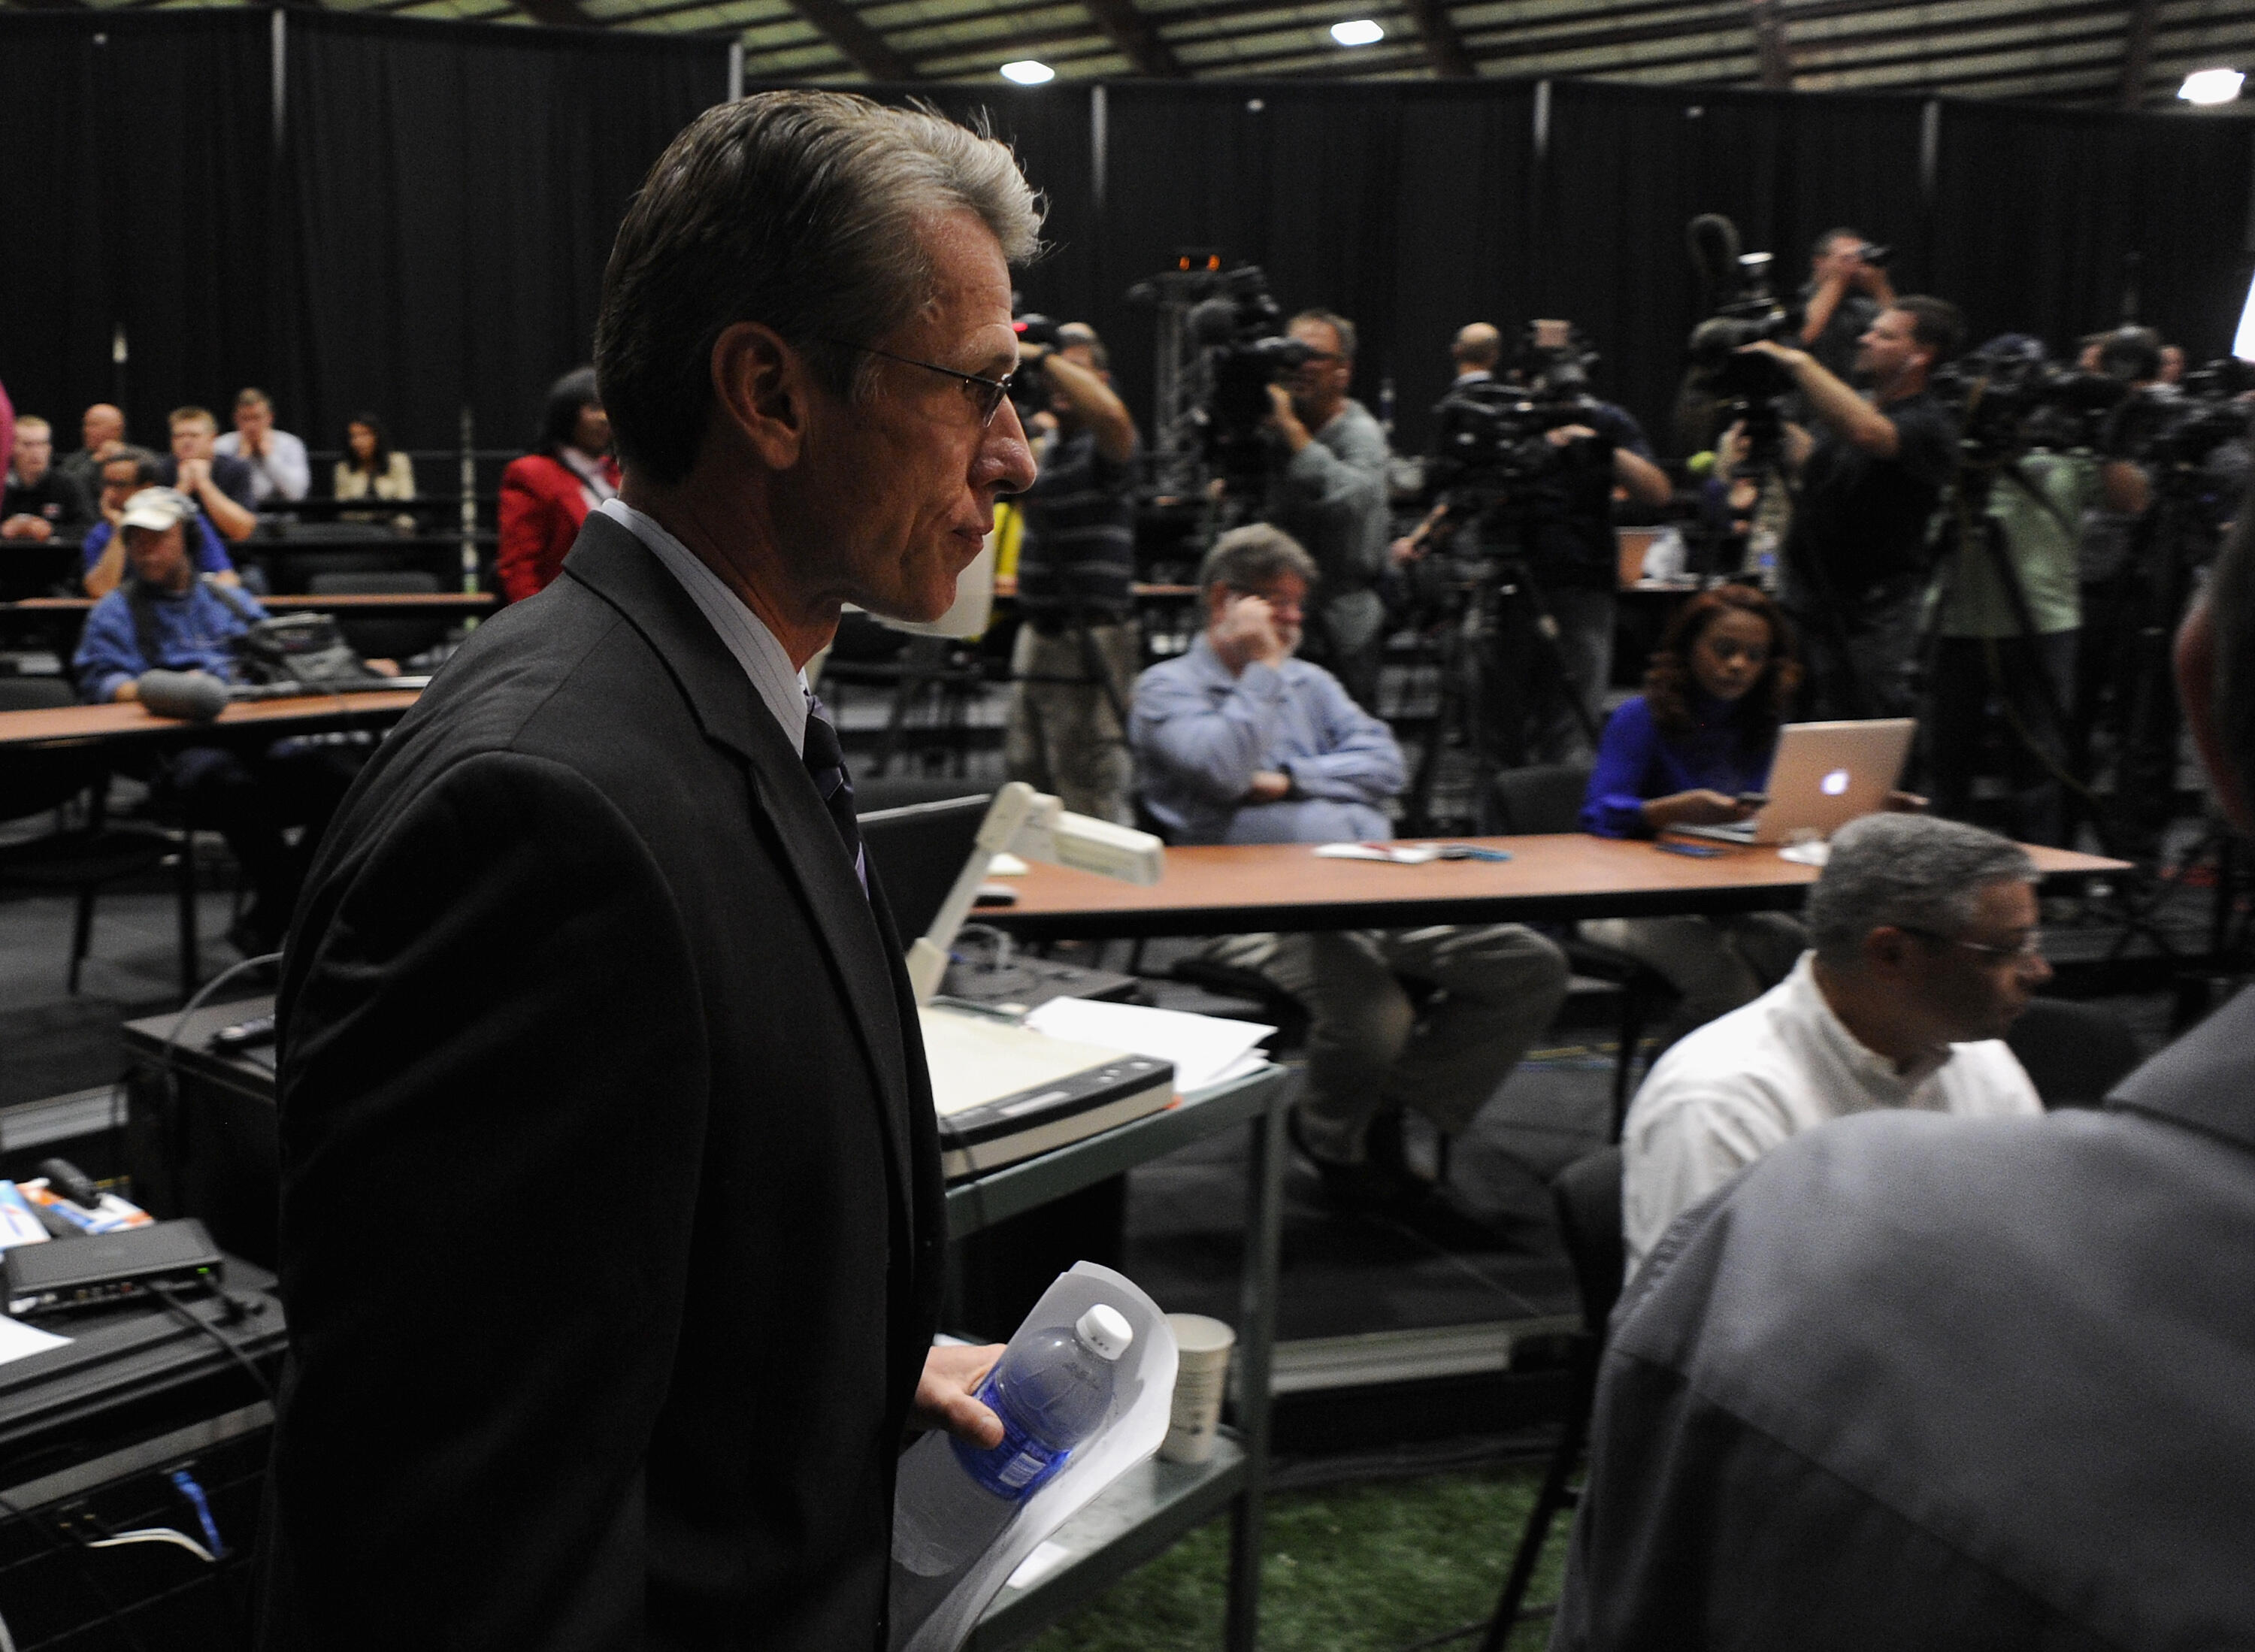 EDEN PRAIRIE, MN - SEPTEMBER 17: General Manager Rick Spielman of the Minnesota Vikings arrives at a press conference on September 17, 2014 at Winter Park in Eden Prairie, Minnesota. The Vikings addressed their decision to put Adrian Peterson on the commi